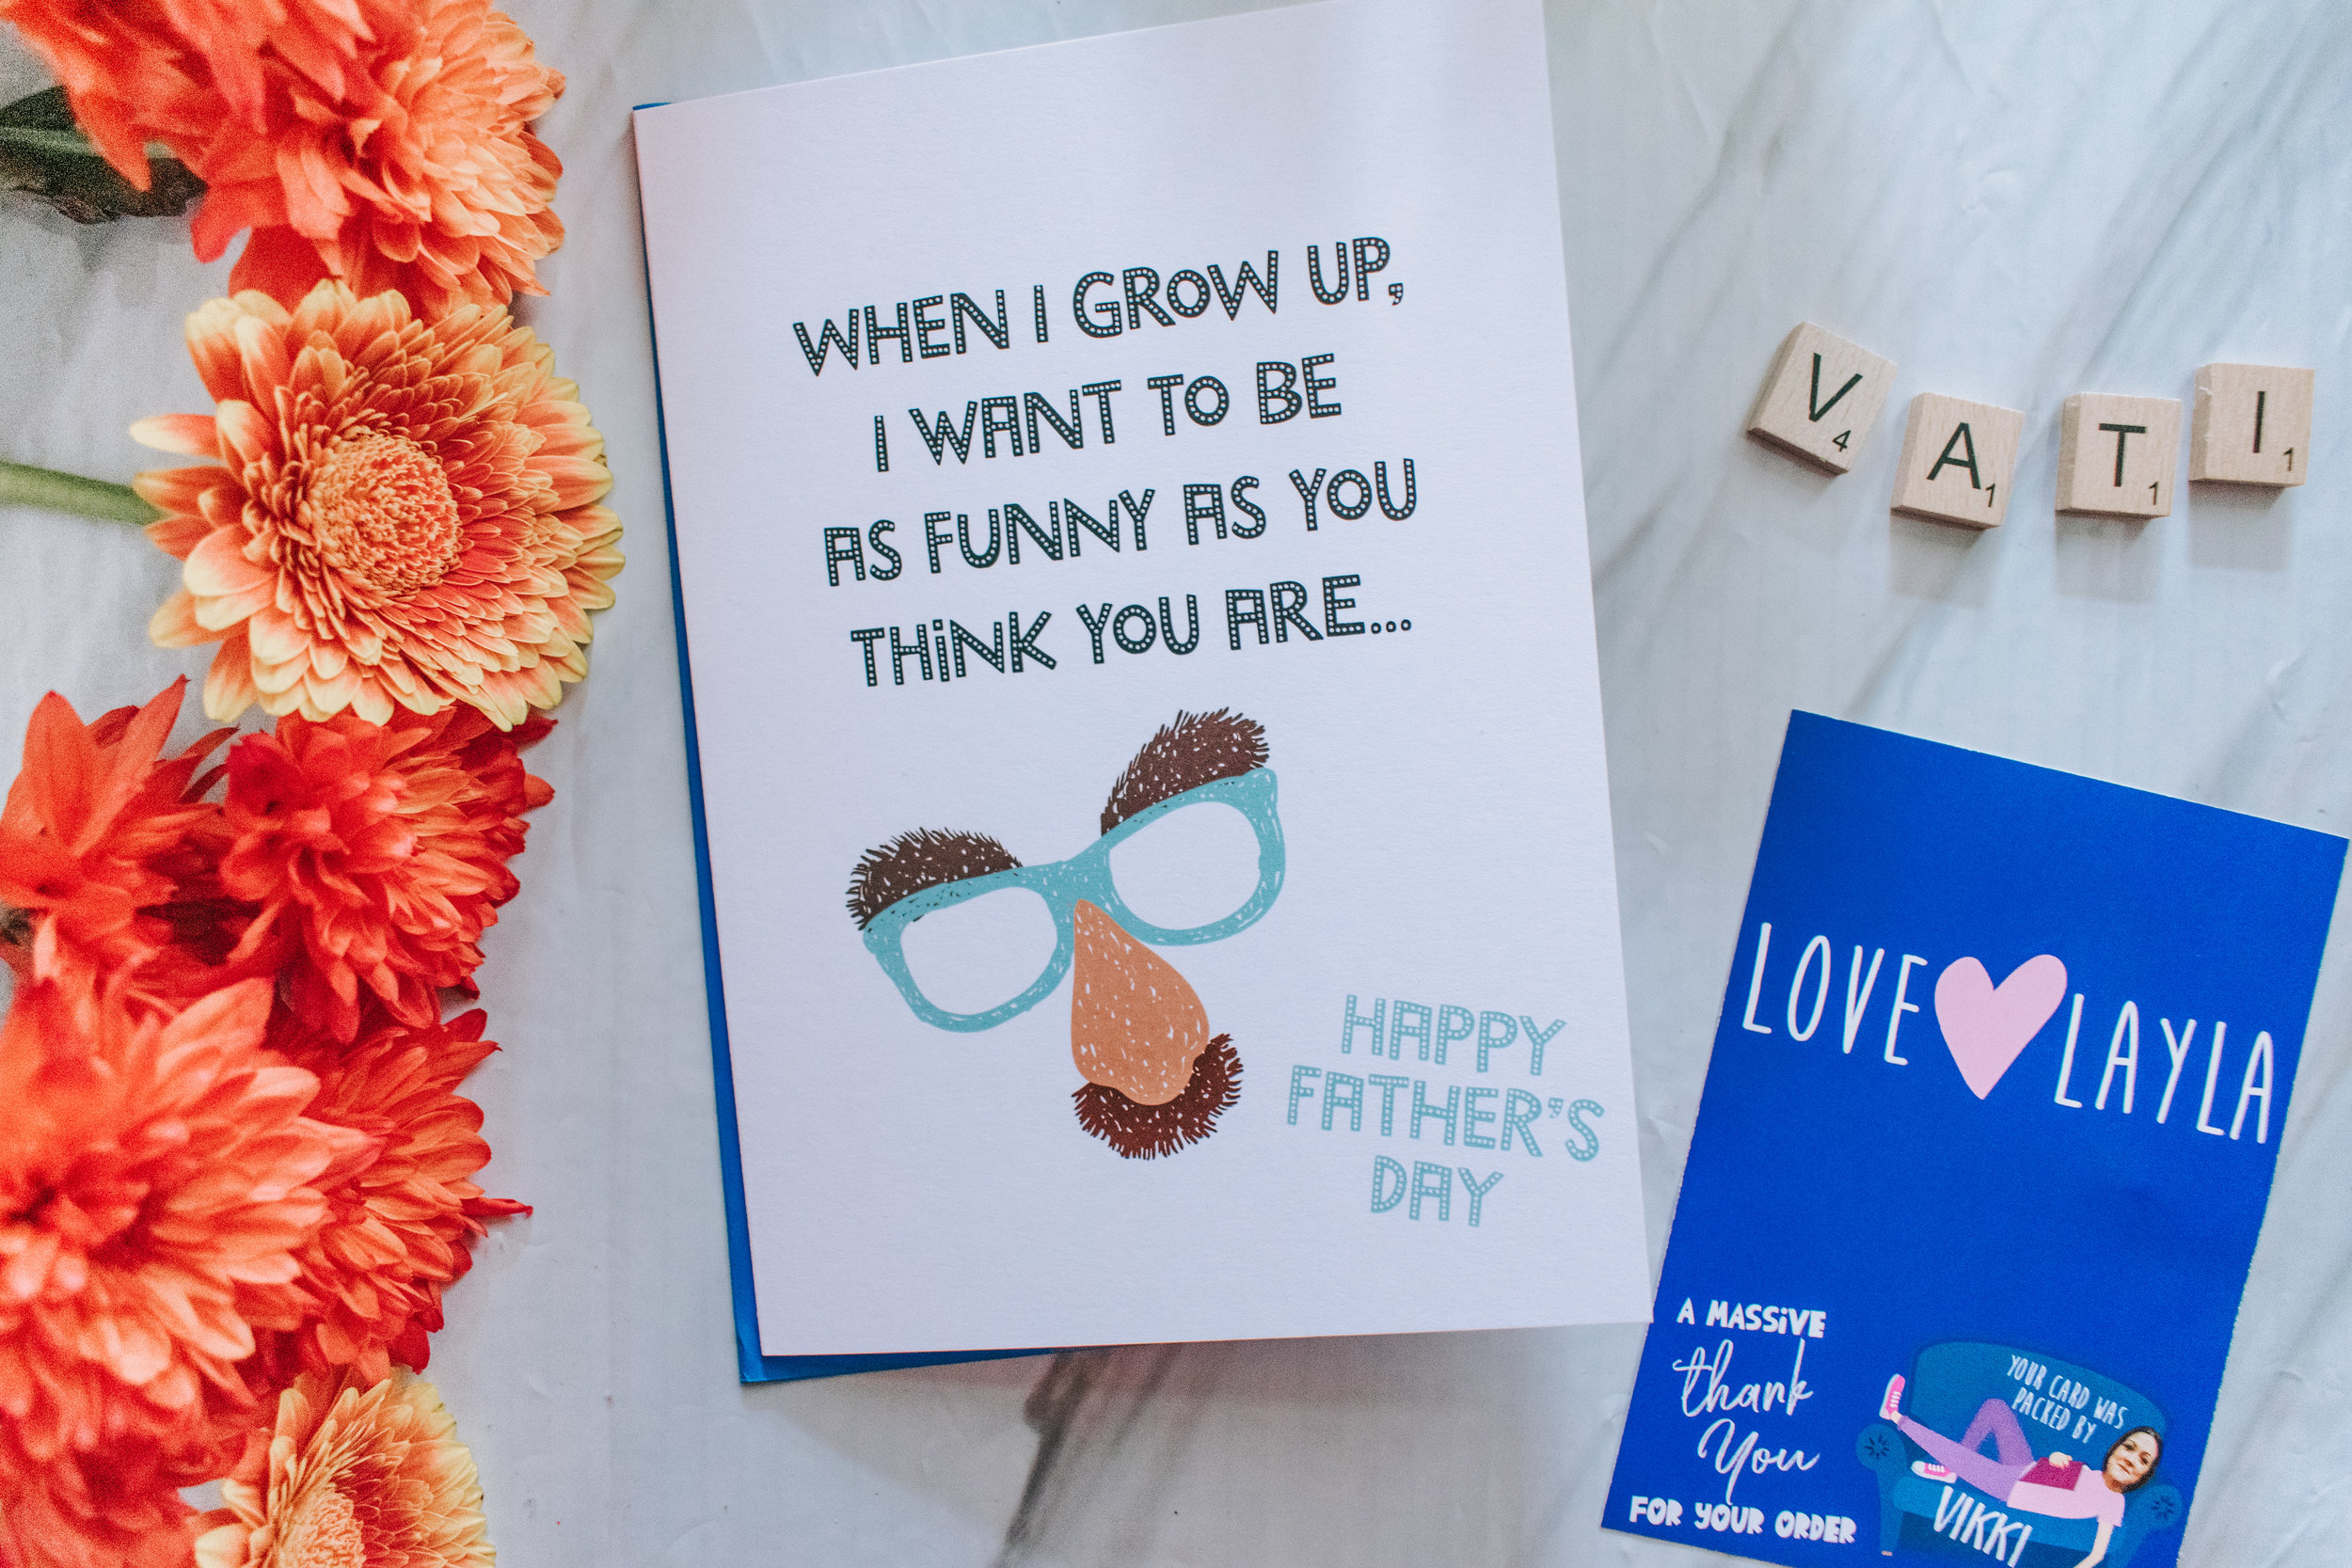 Love Layla funny as dad Father's Day card.jpeg